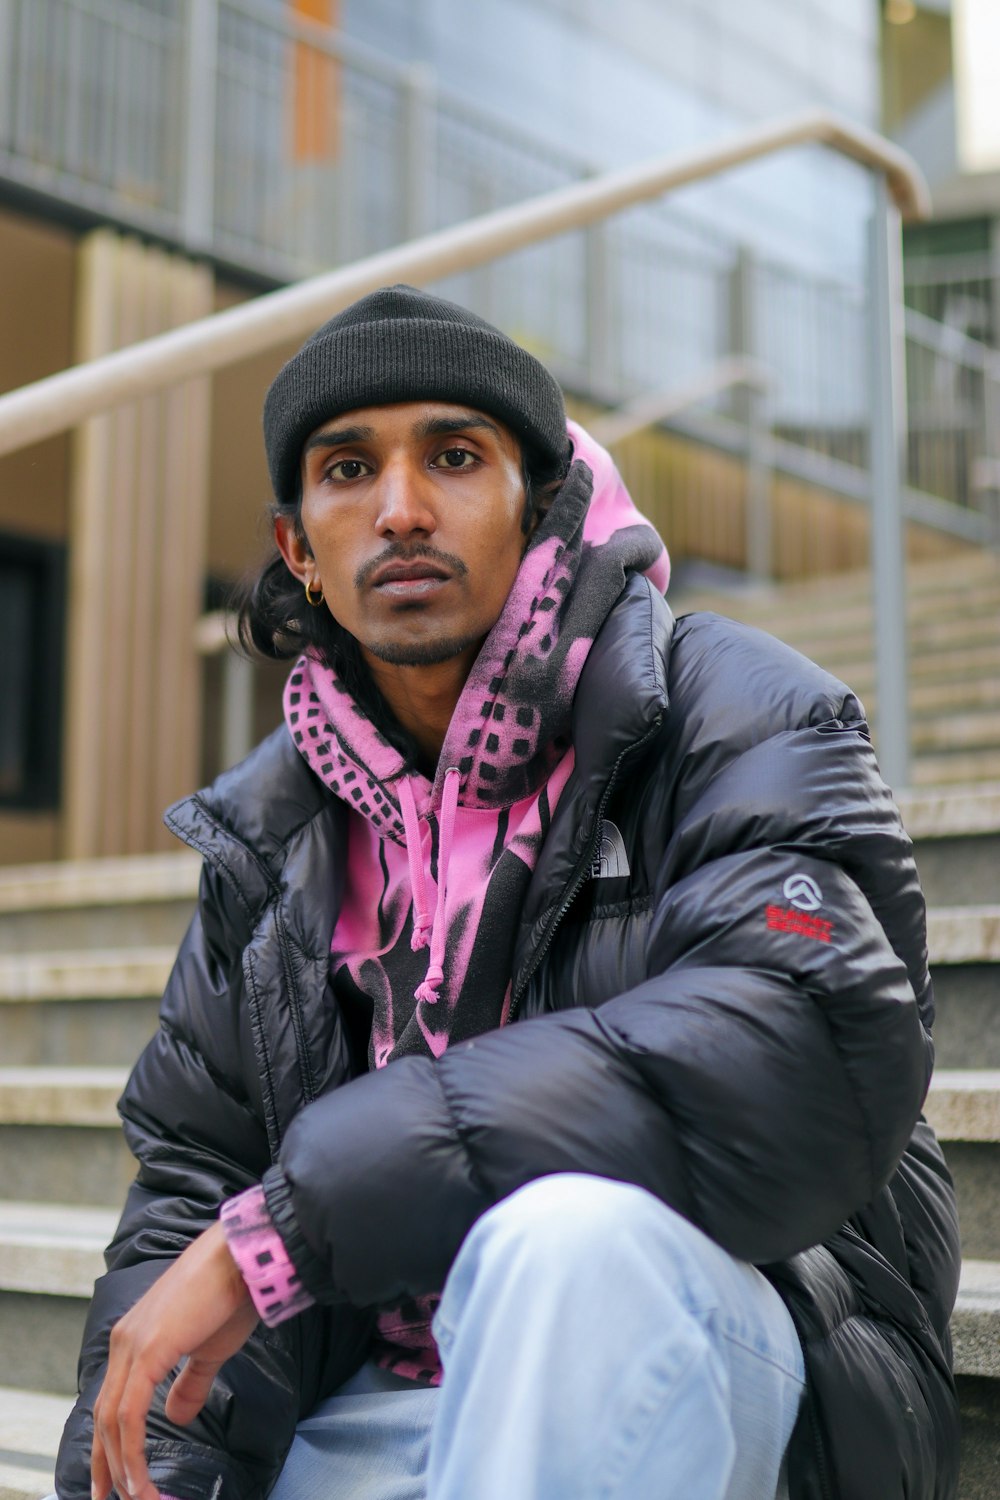 a man sitting on the steps wearing a black and pink jacket